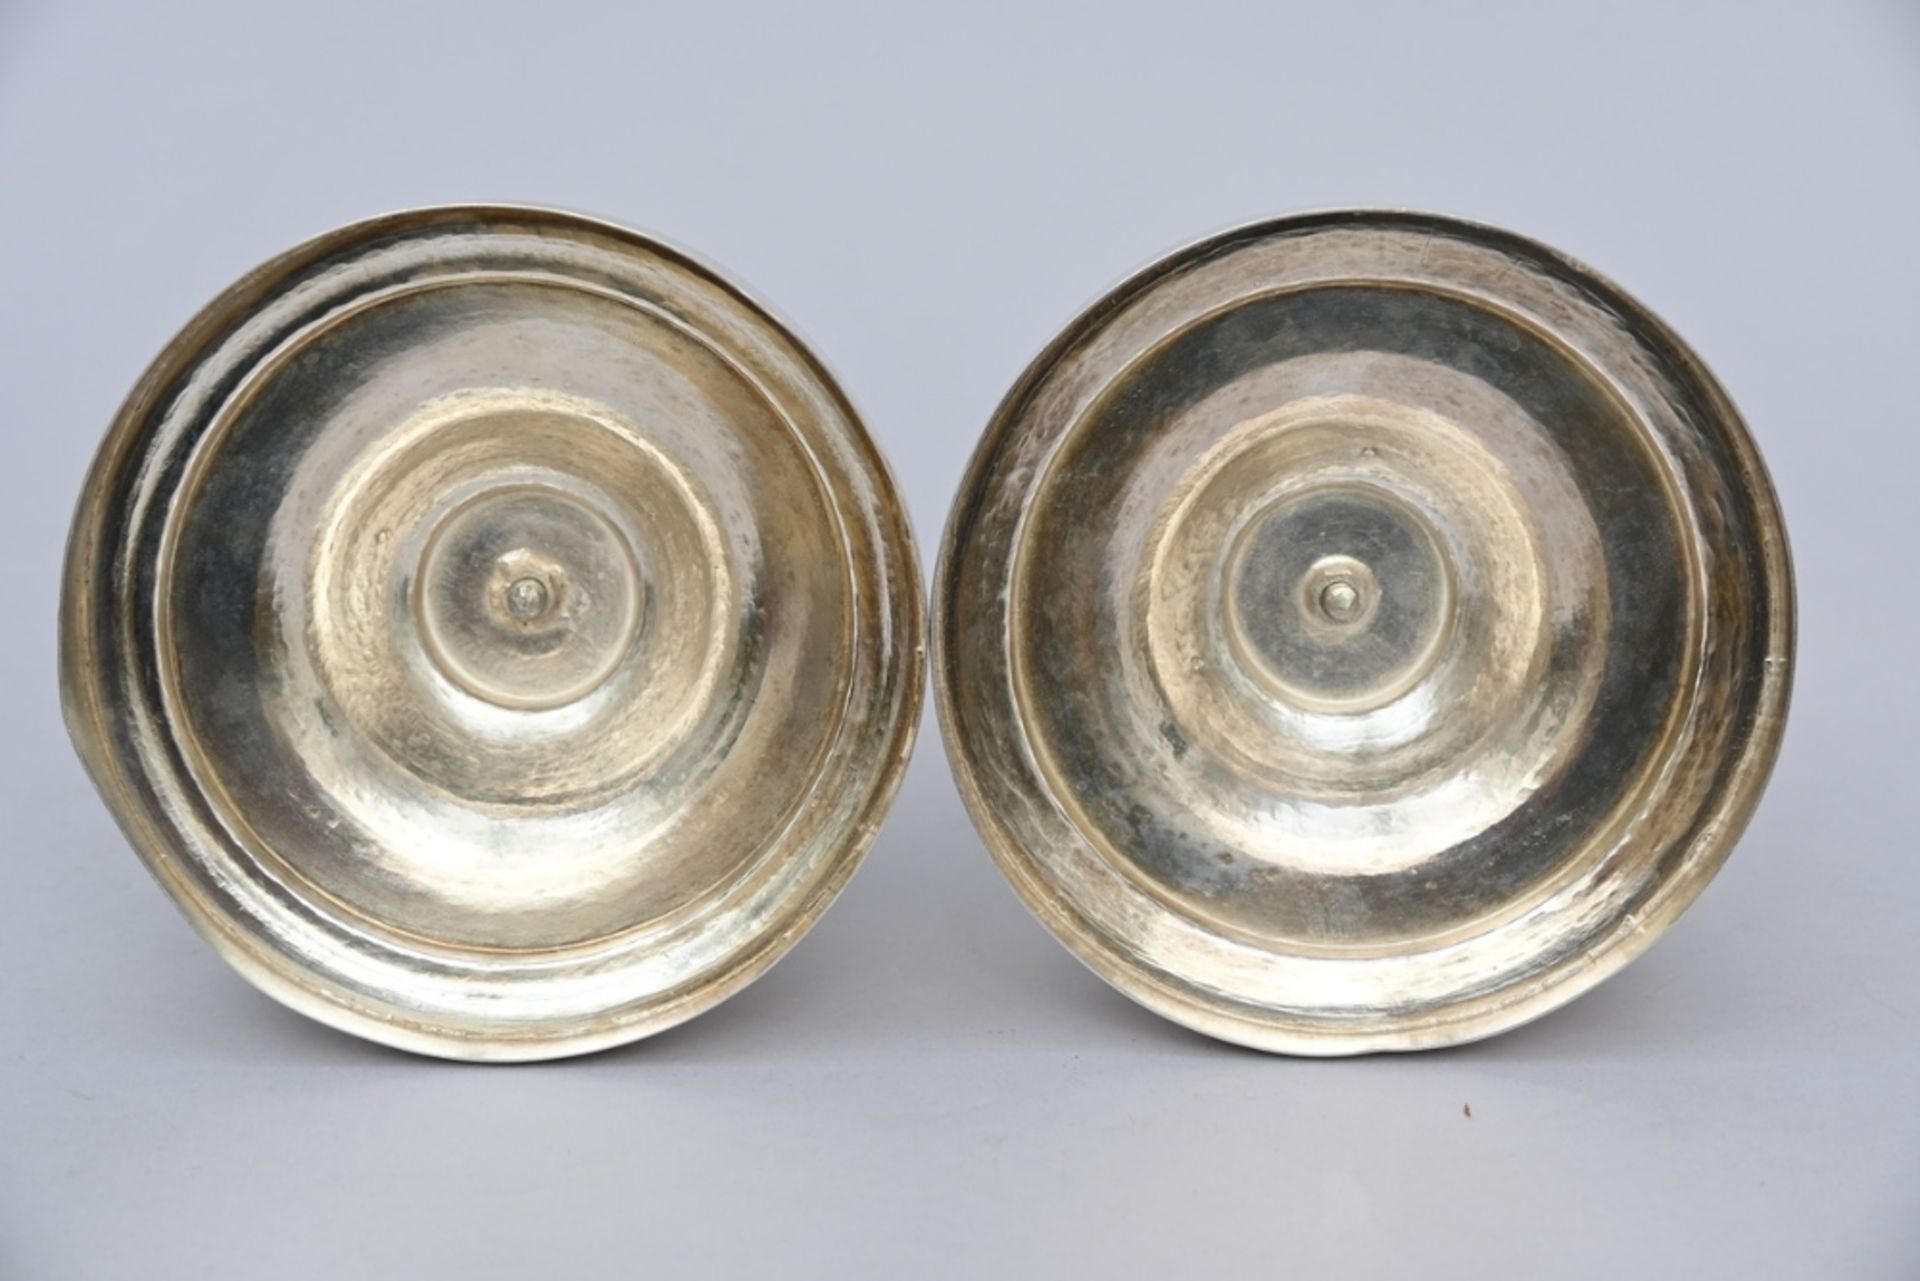 A pair of silver Louis-Philippe candlesticks, Liege 19th century (h31cm) (weight 770gr) - Image 3 of 4